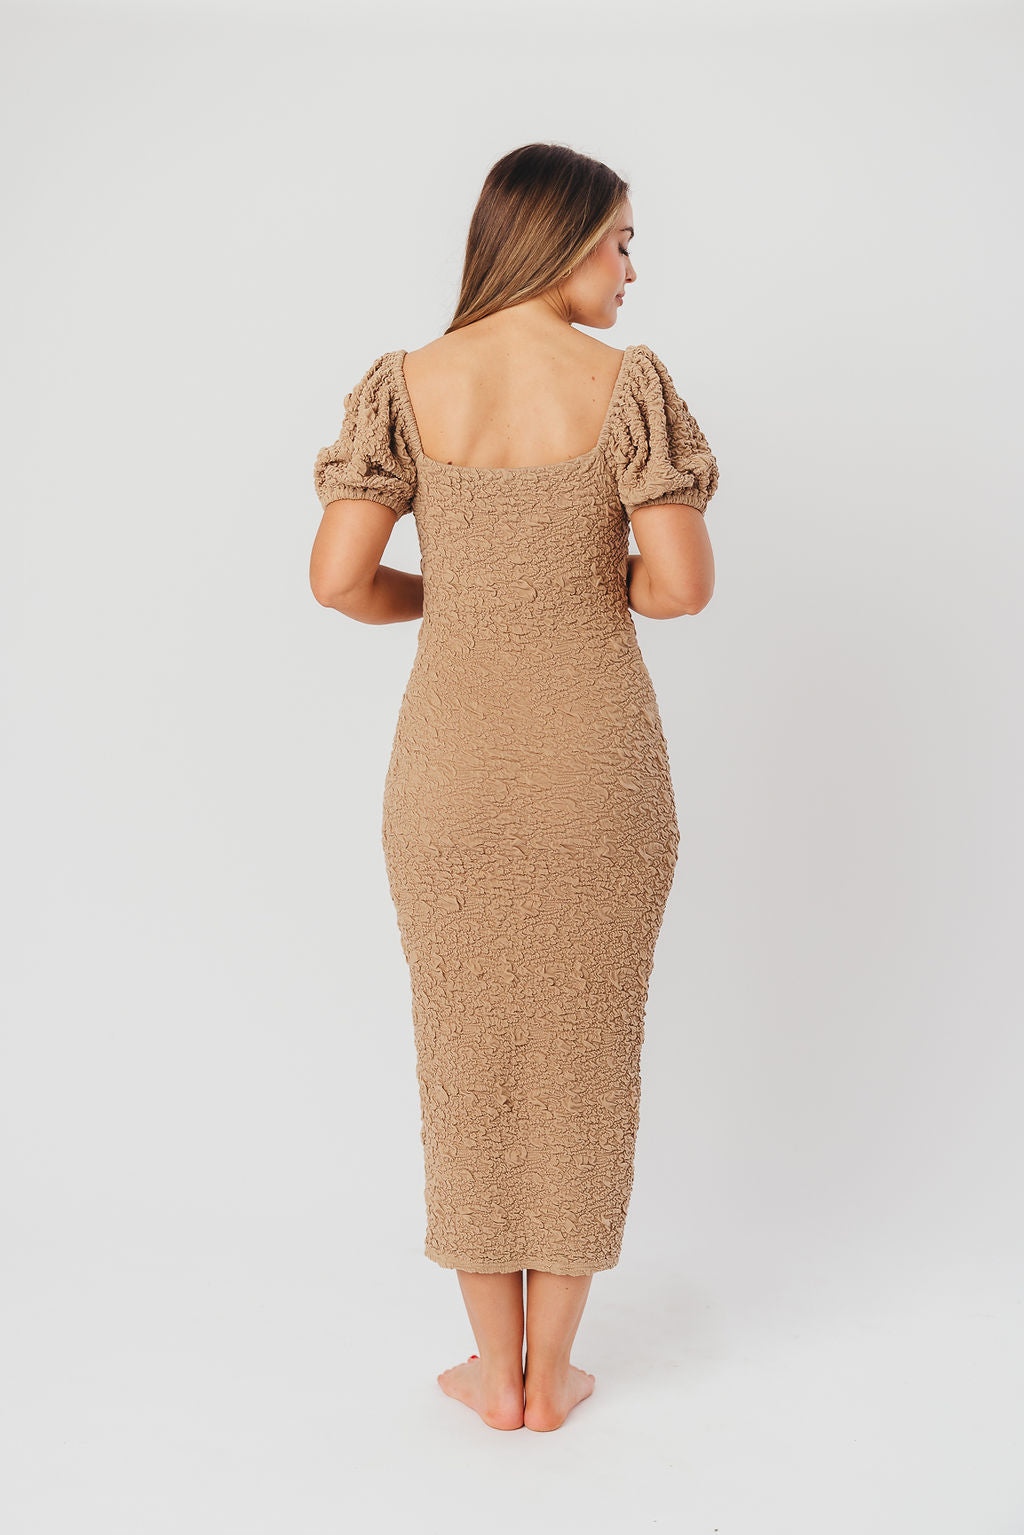 Blakeley Textured Midi Dress in Taupe - Bump Friendly (S-XL)